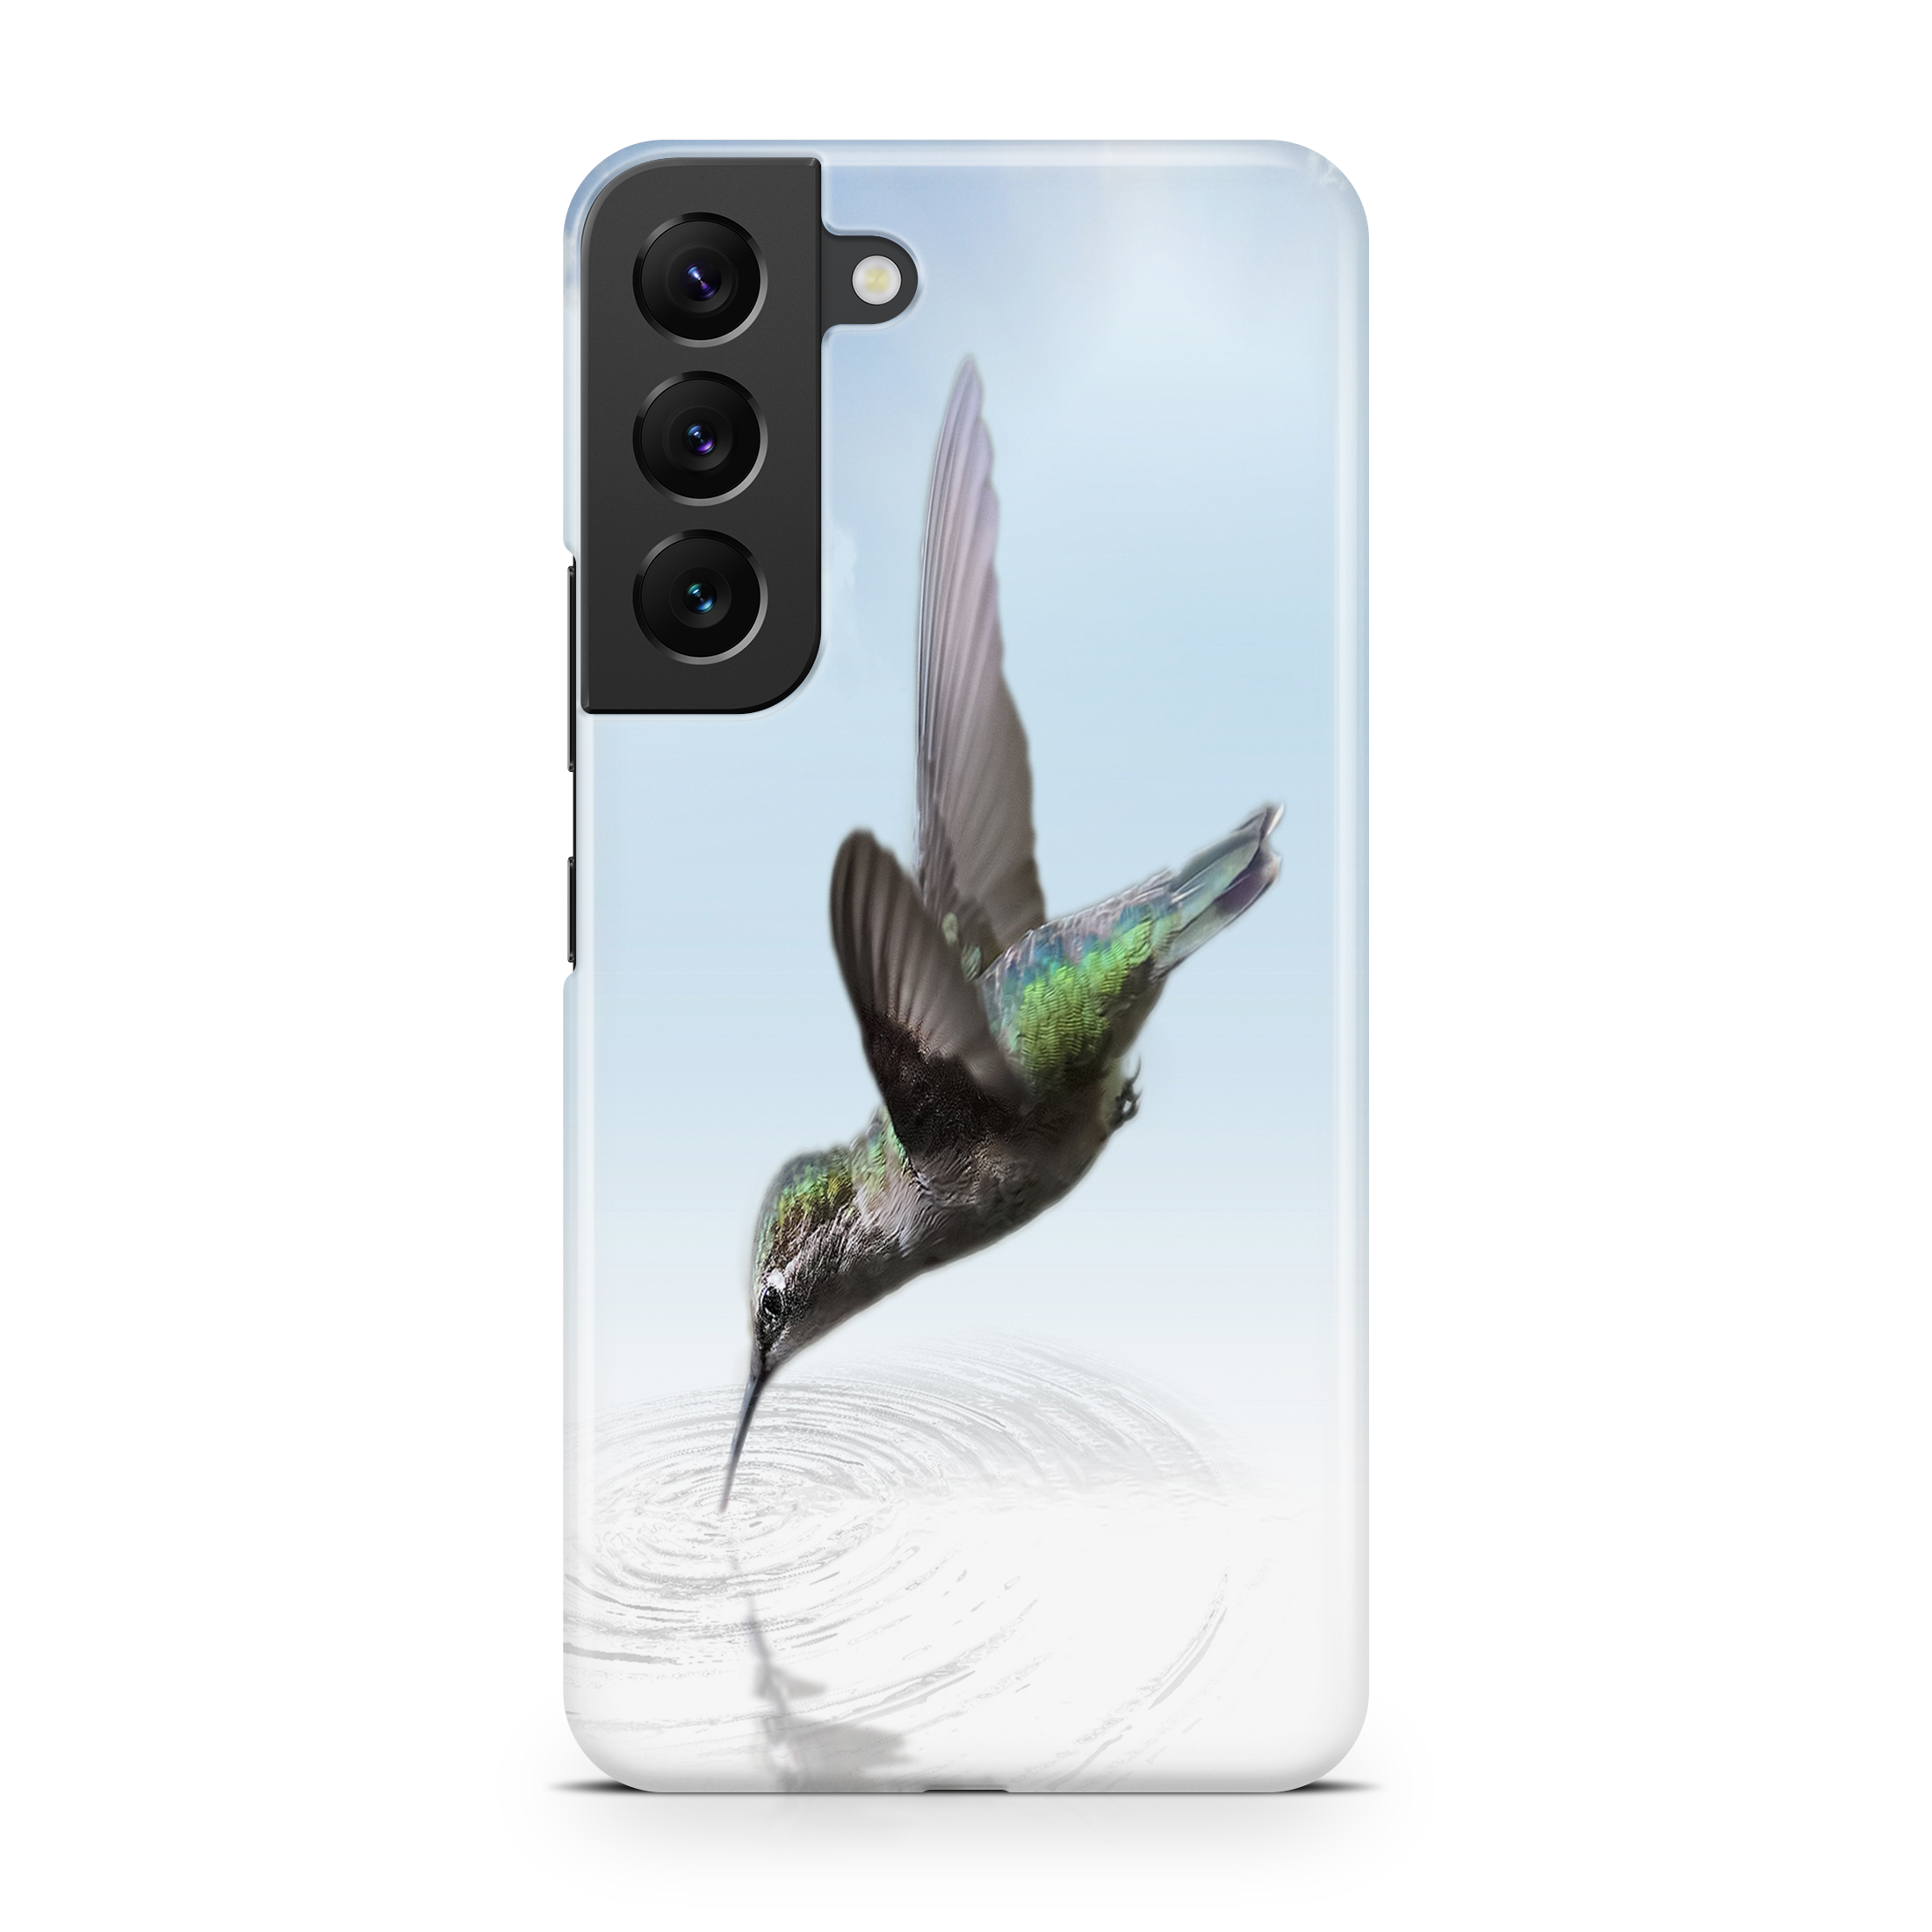 Simple Hummingbird - Samsung phone case designs by CaseSwagger